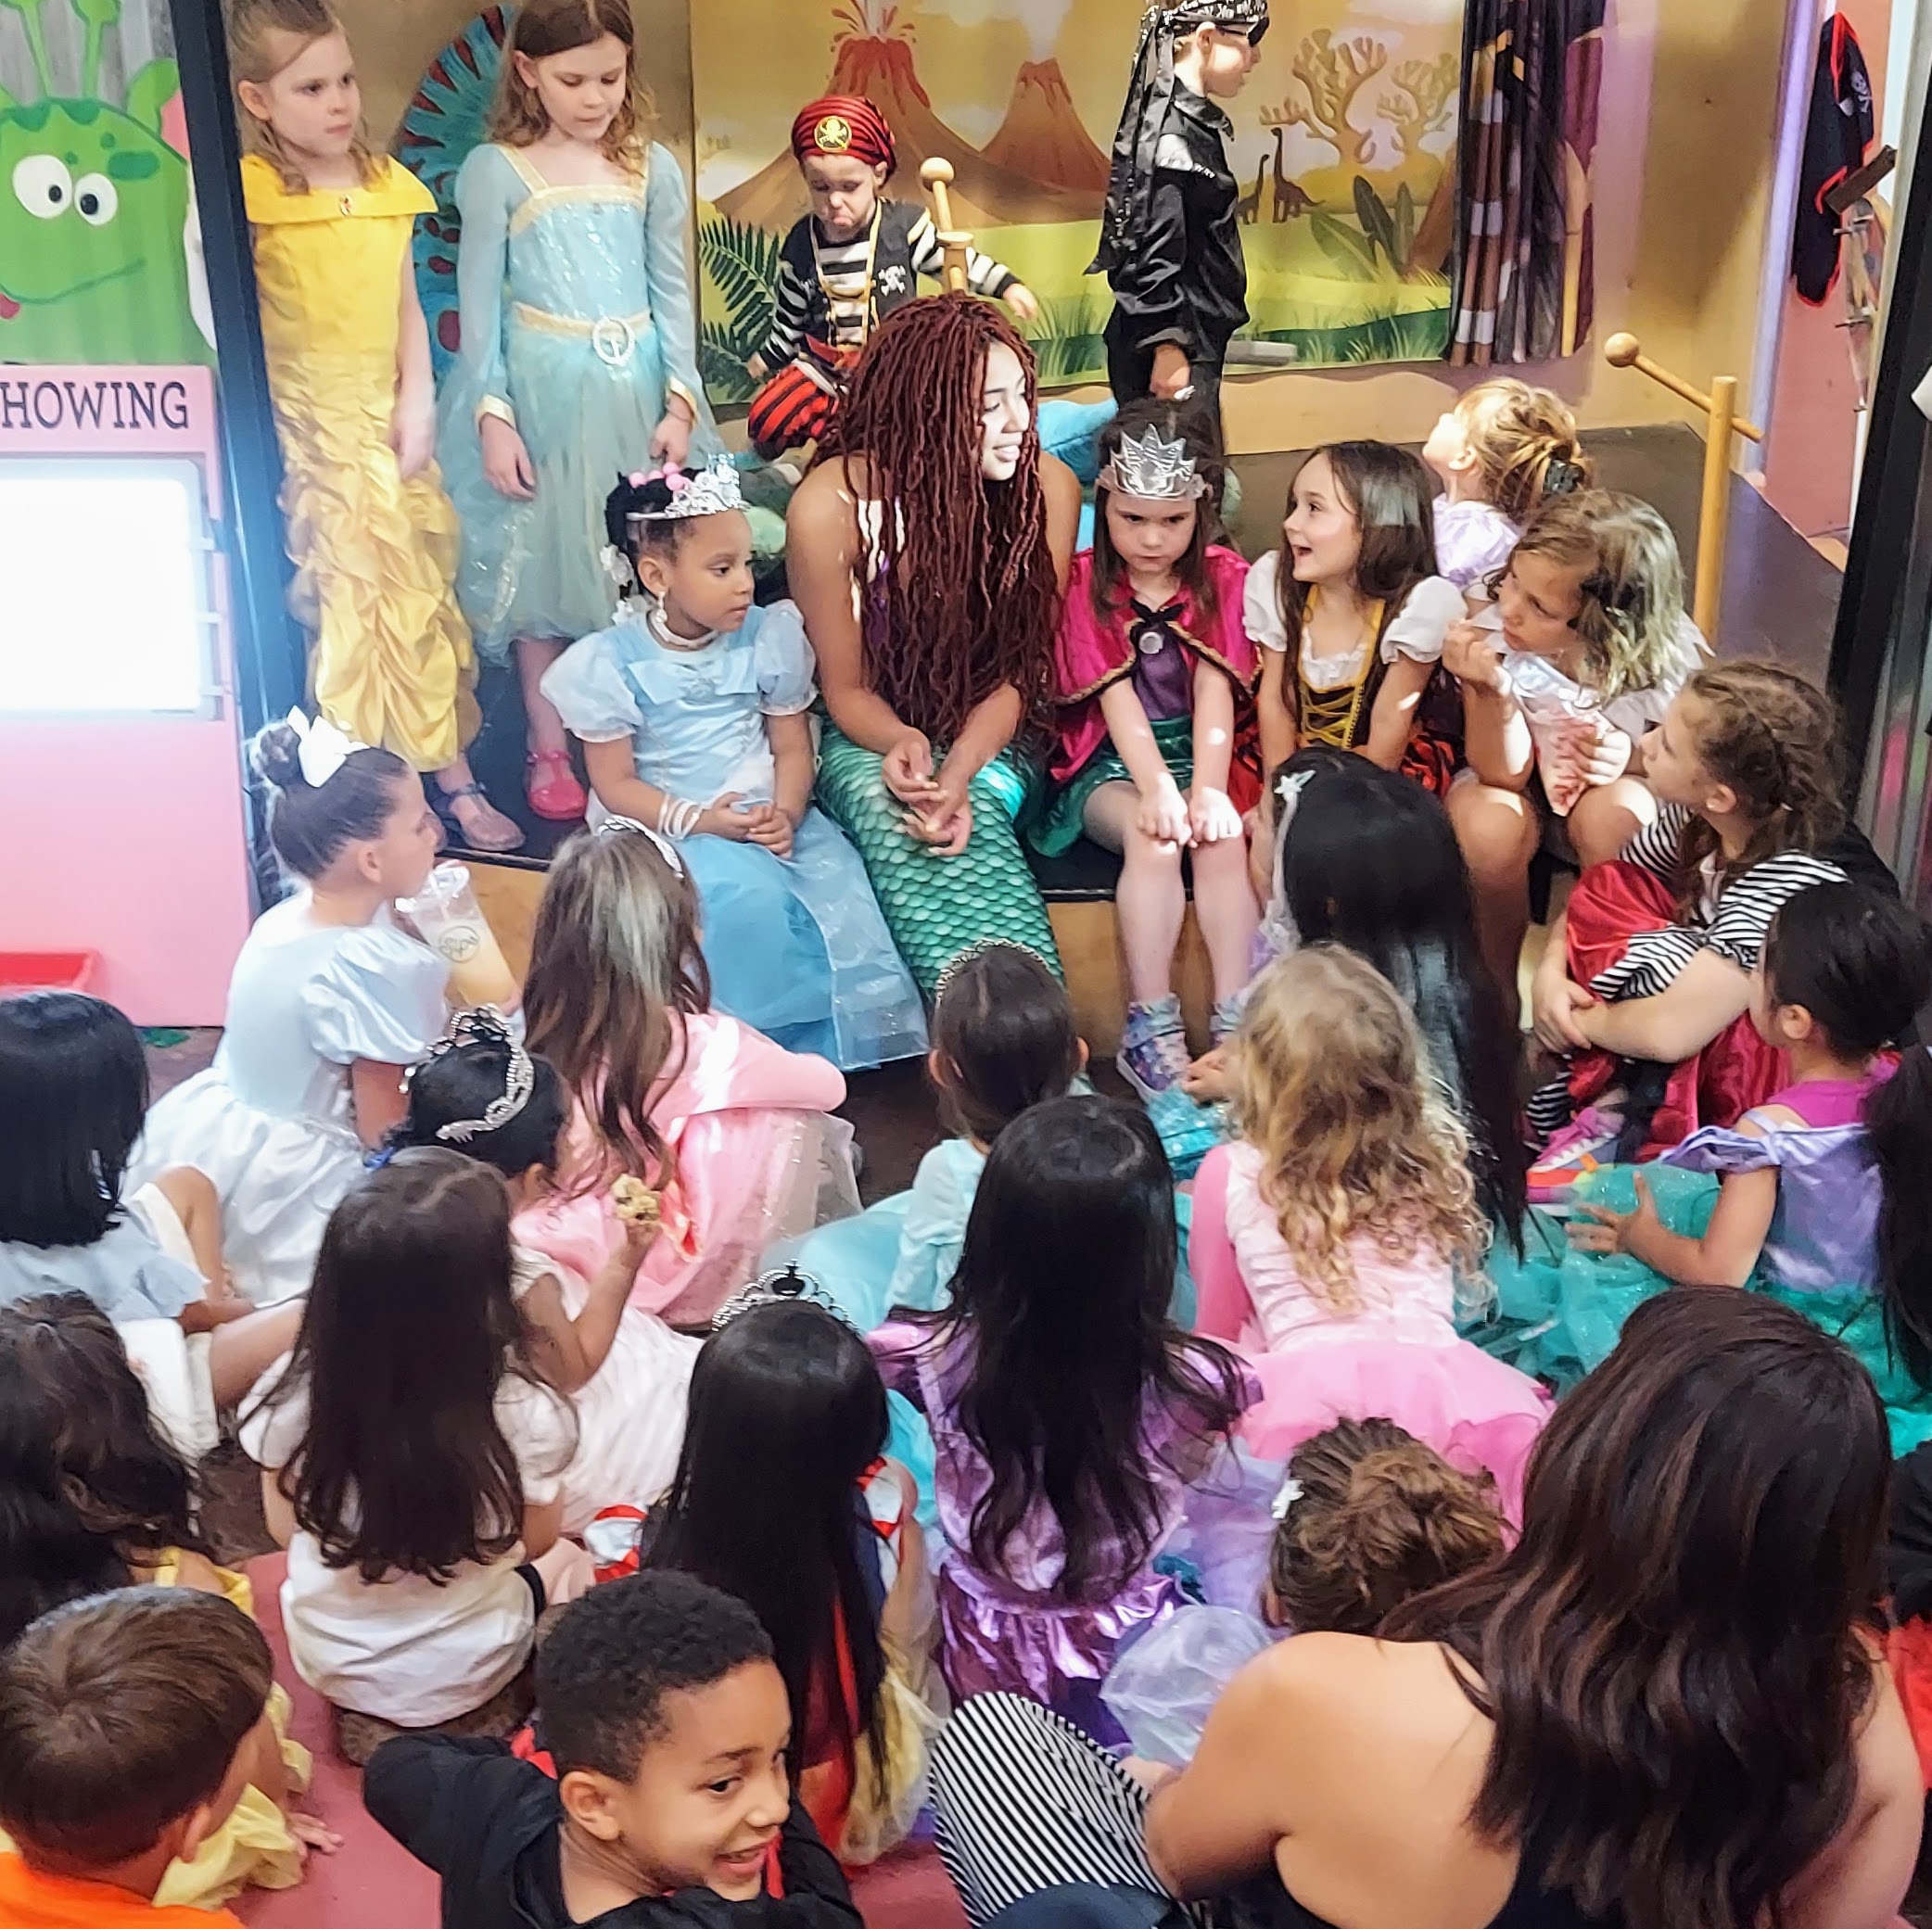 A large group of children surround a woman dressed as a mermaid